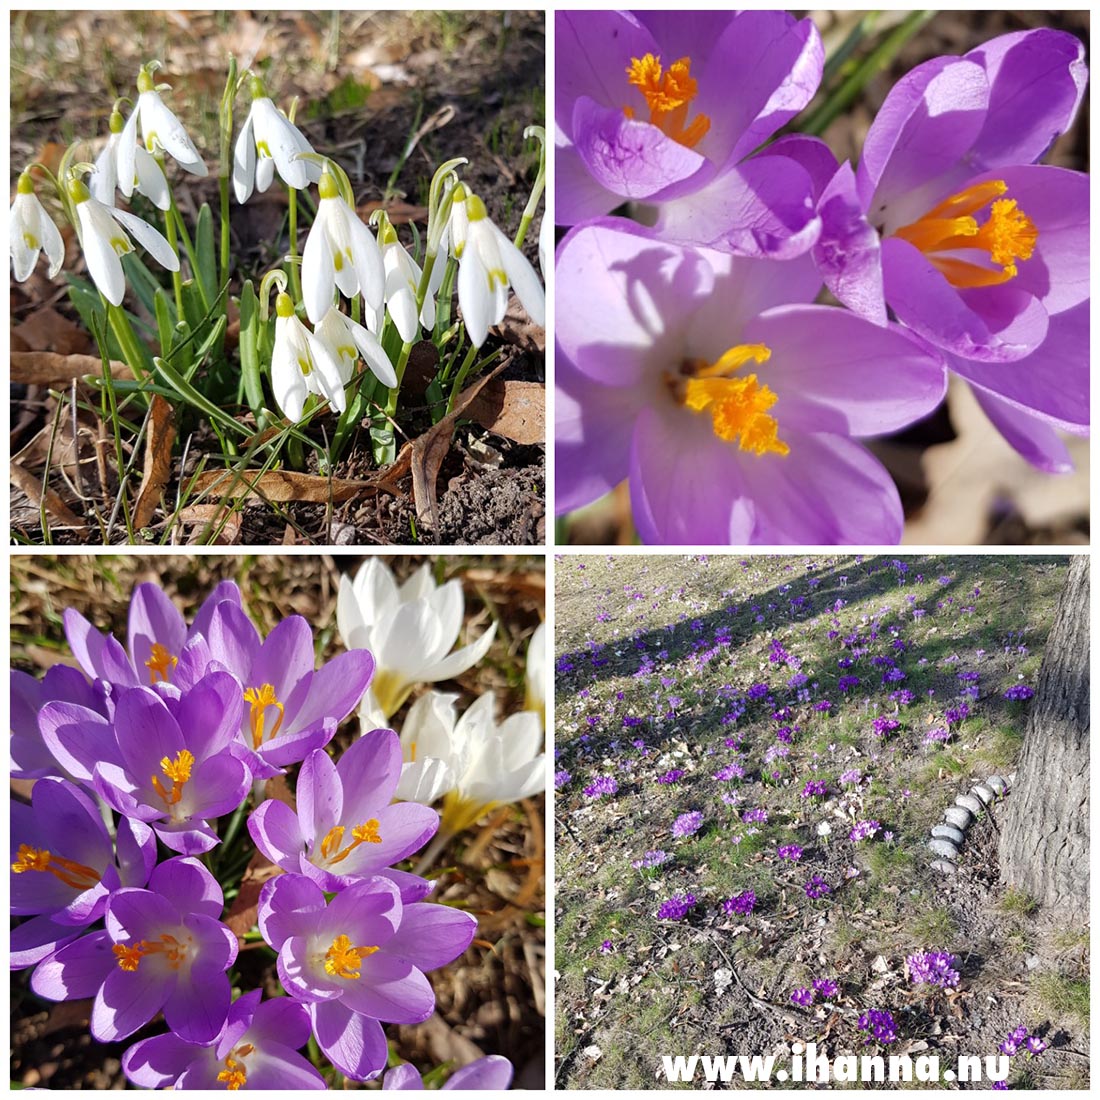 Swedish spring is beautiful. Photo by Hanna Andersson, 2021 www.ihanna.nu #sweden